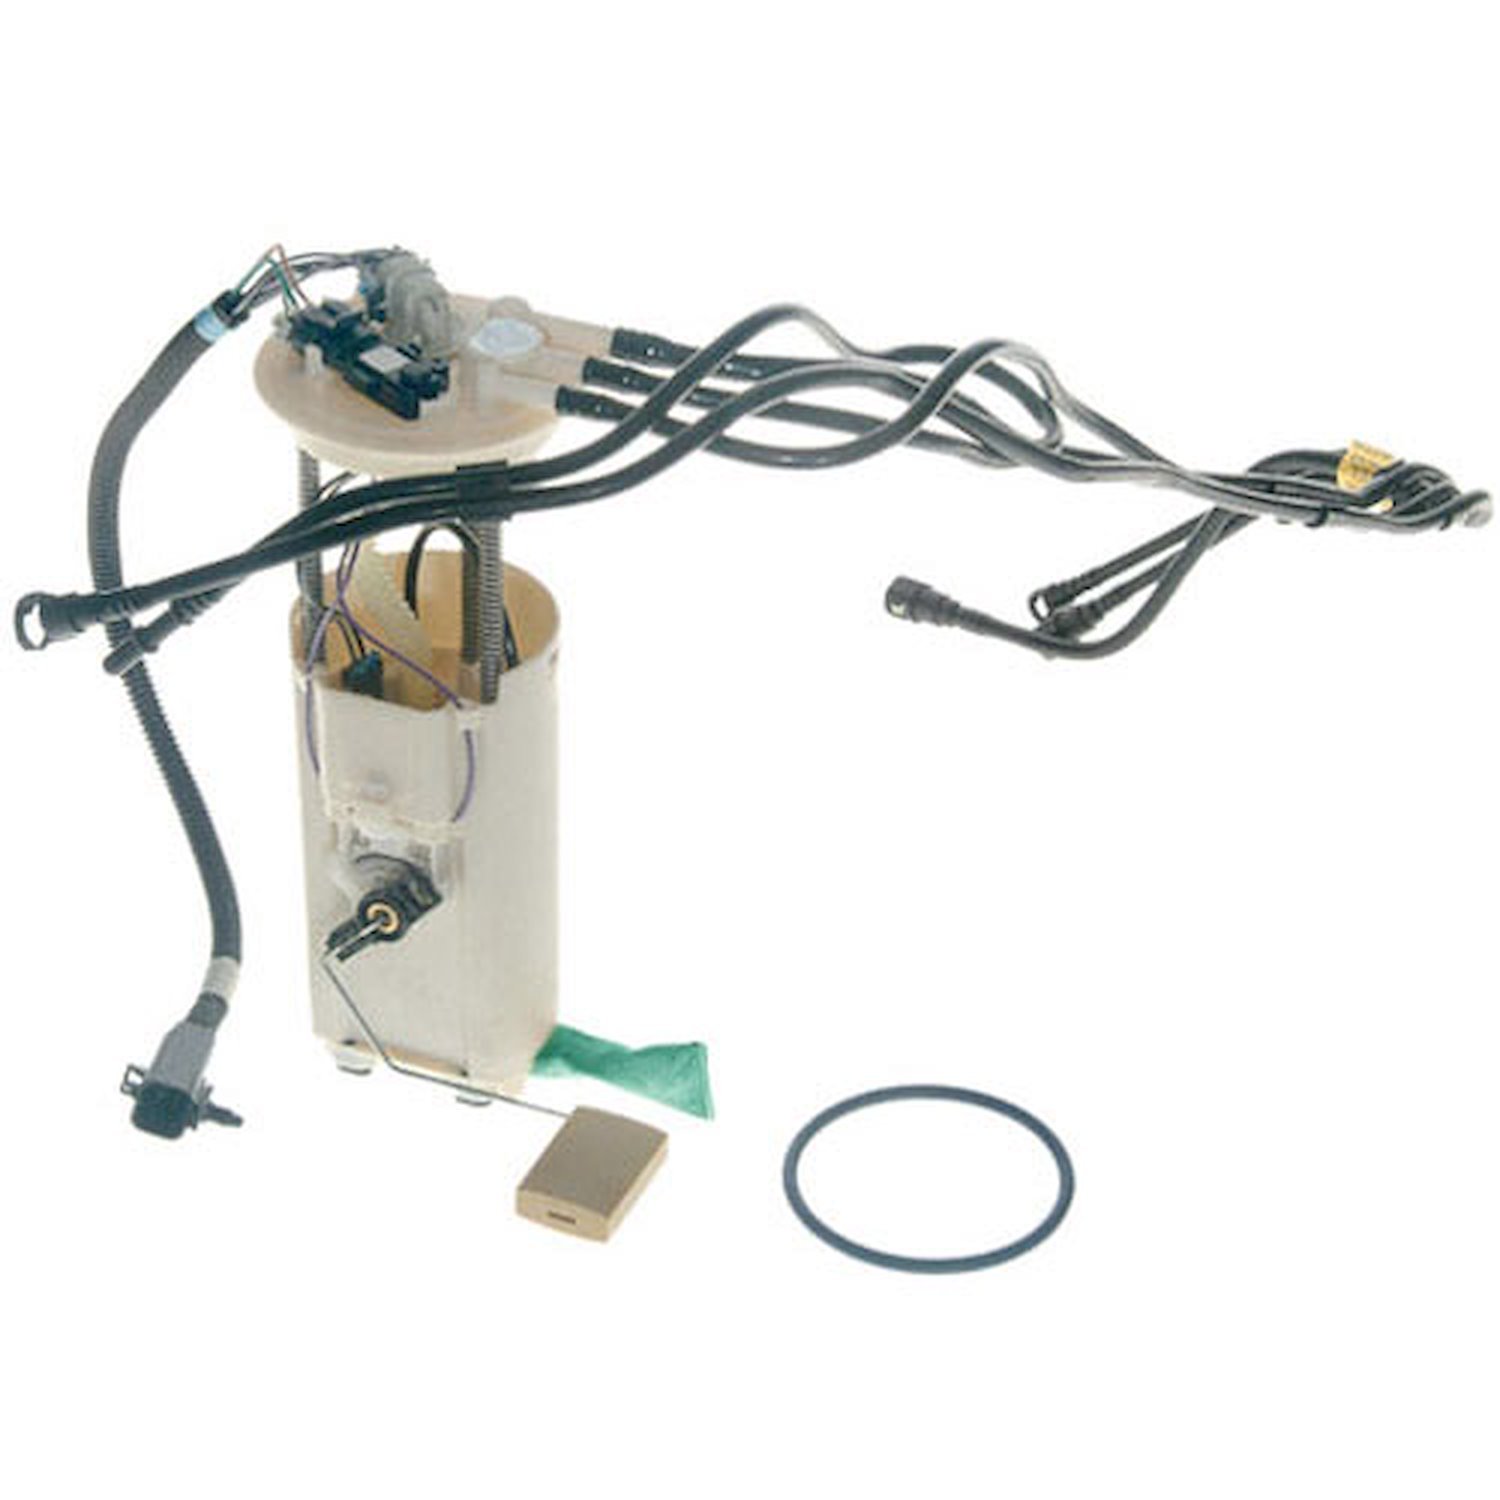 OE Chrysler/Dodge Replacement Electric Fuel Pump Module Assembly Journey: 2009 - 2015